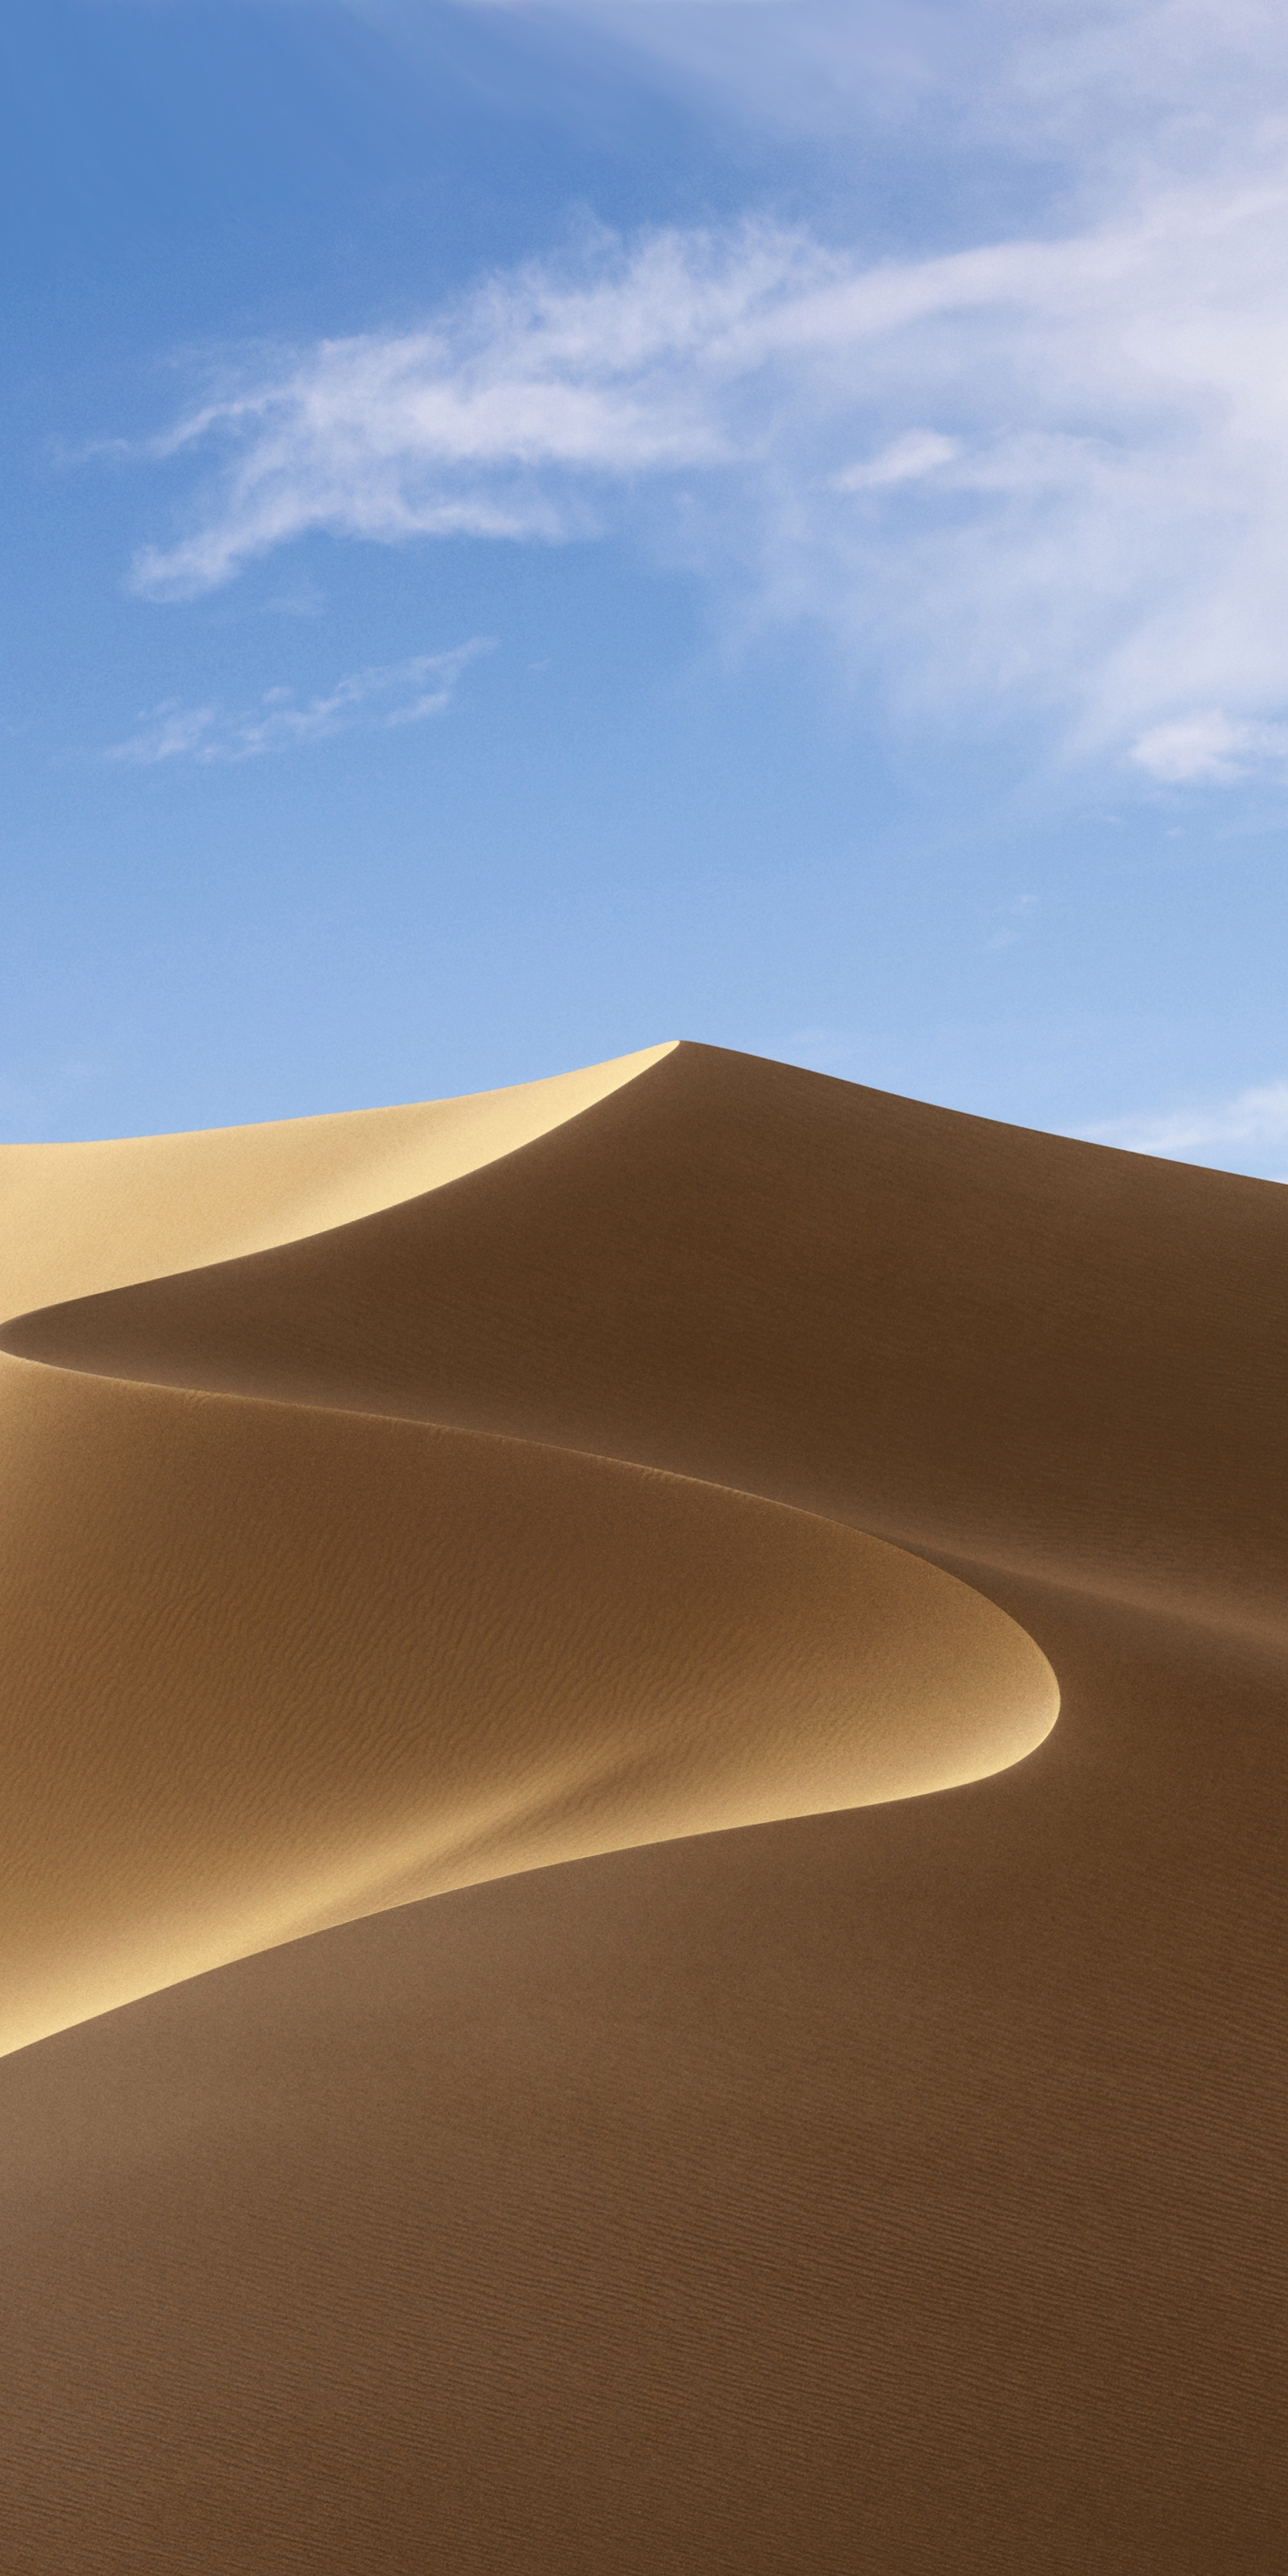 macOS Mojave Stock Wallpaper (Day) - Wallpapers Central